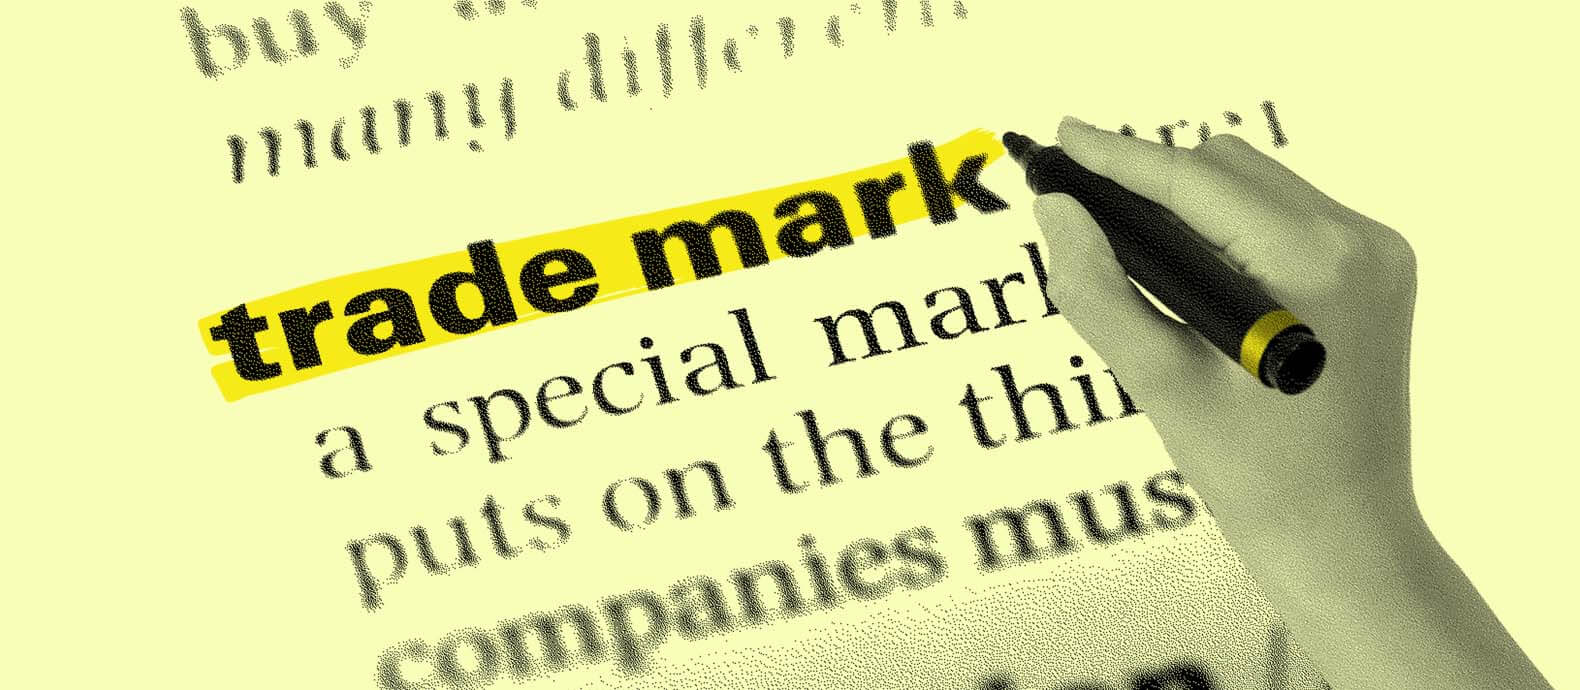 Trademark monitoring: Everything you need to know